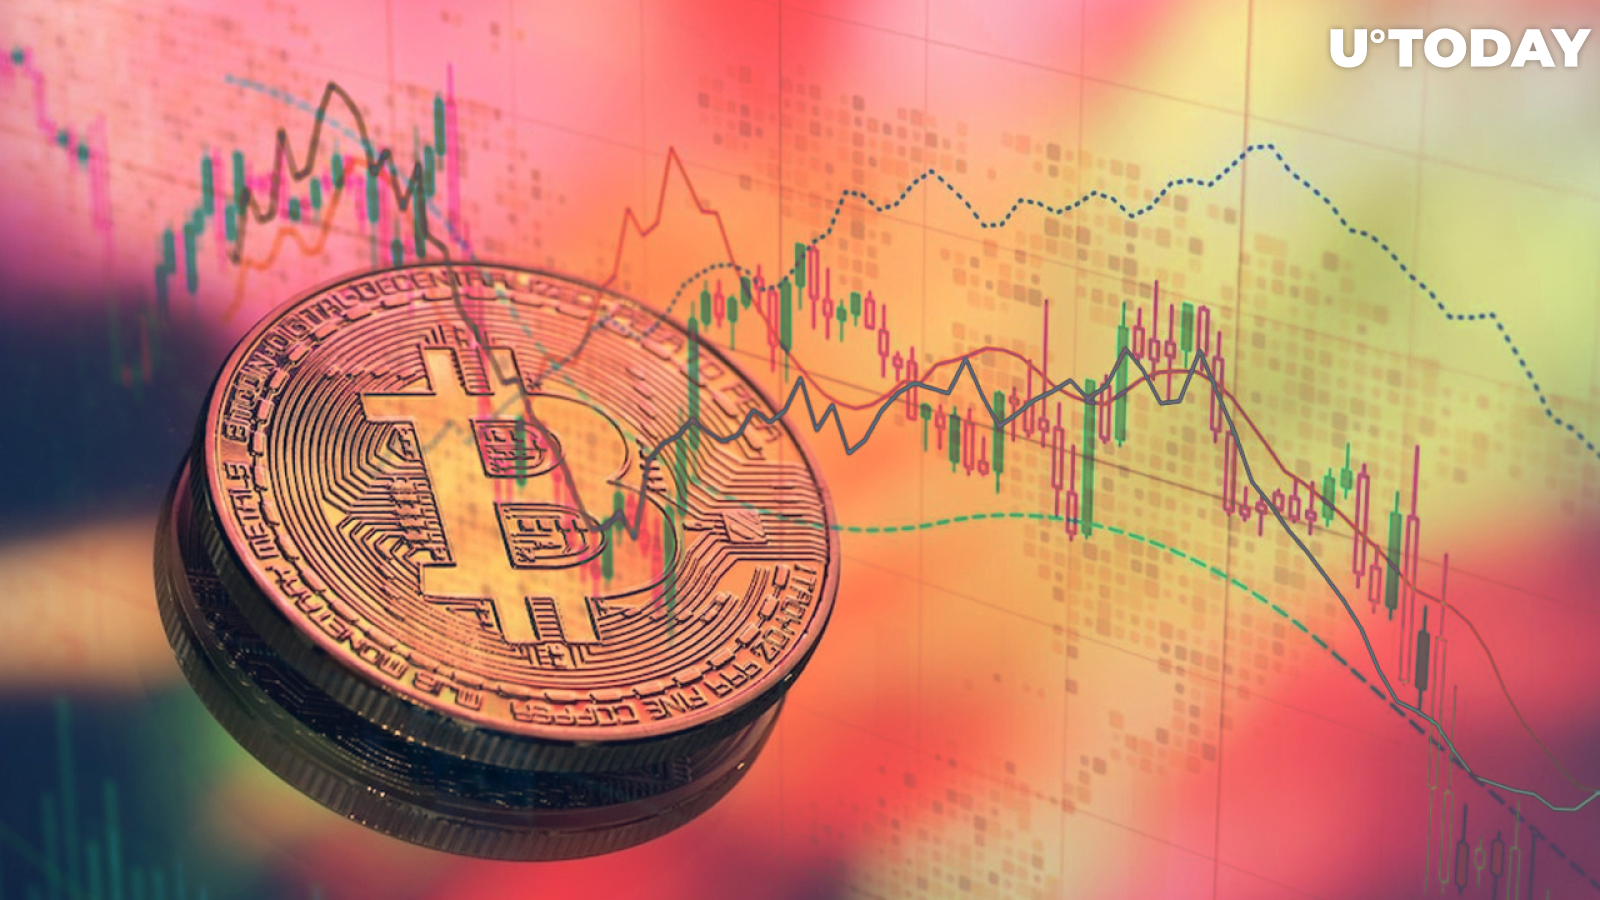 Bitcoin Briefly Reclaims $20,000 Before Paring Gains